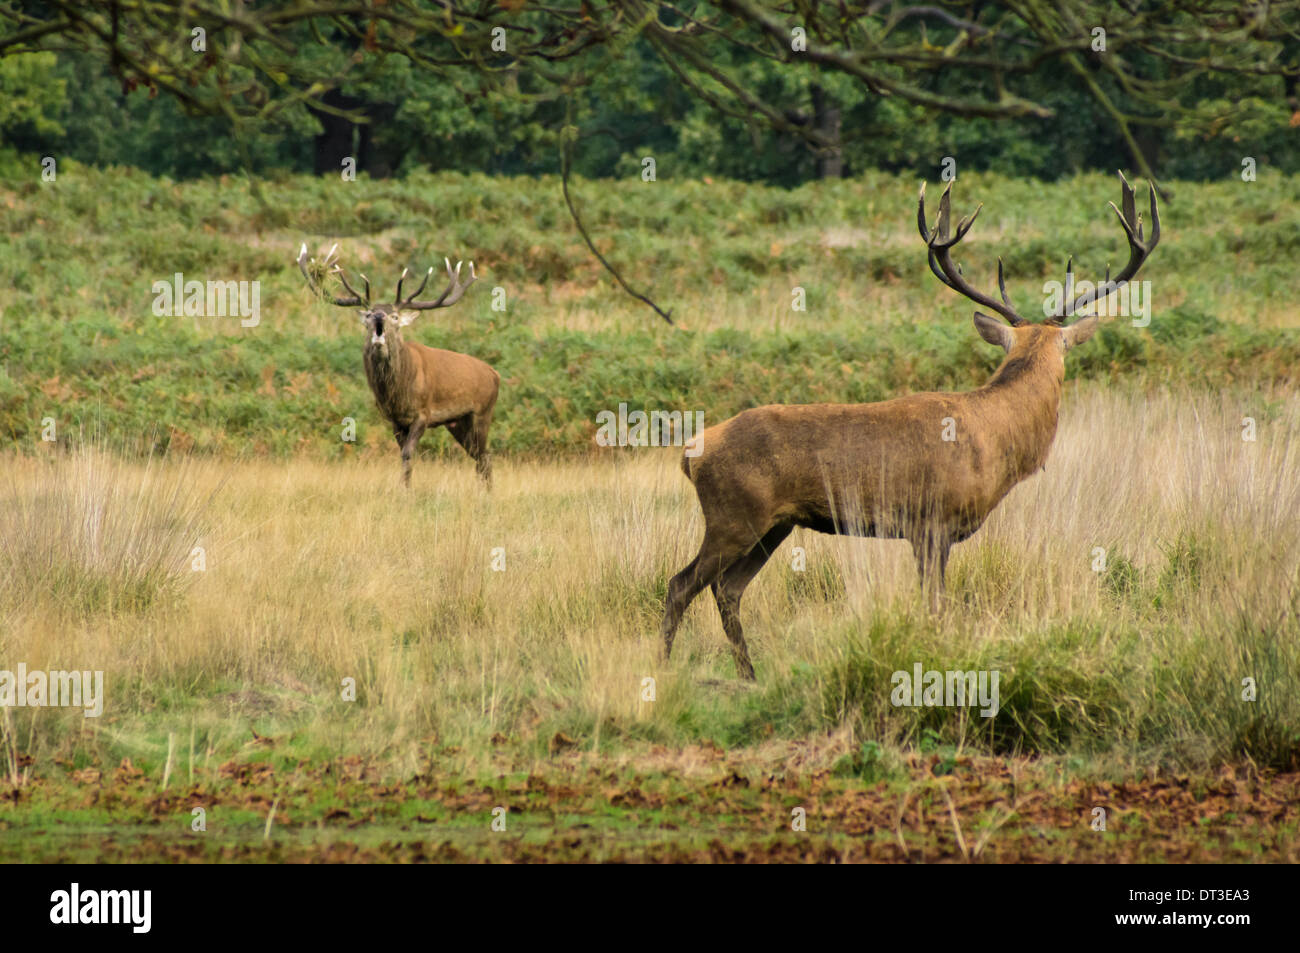 Red deer standing on meadow in forest Stock Photo